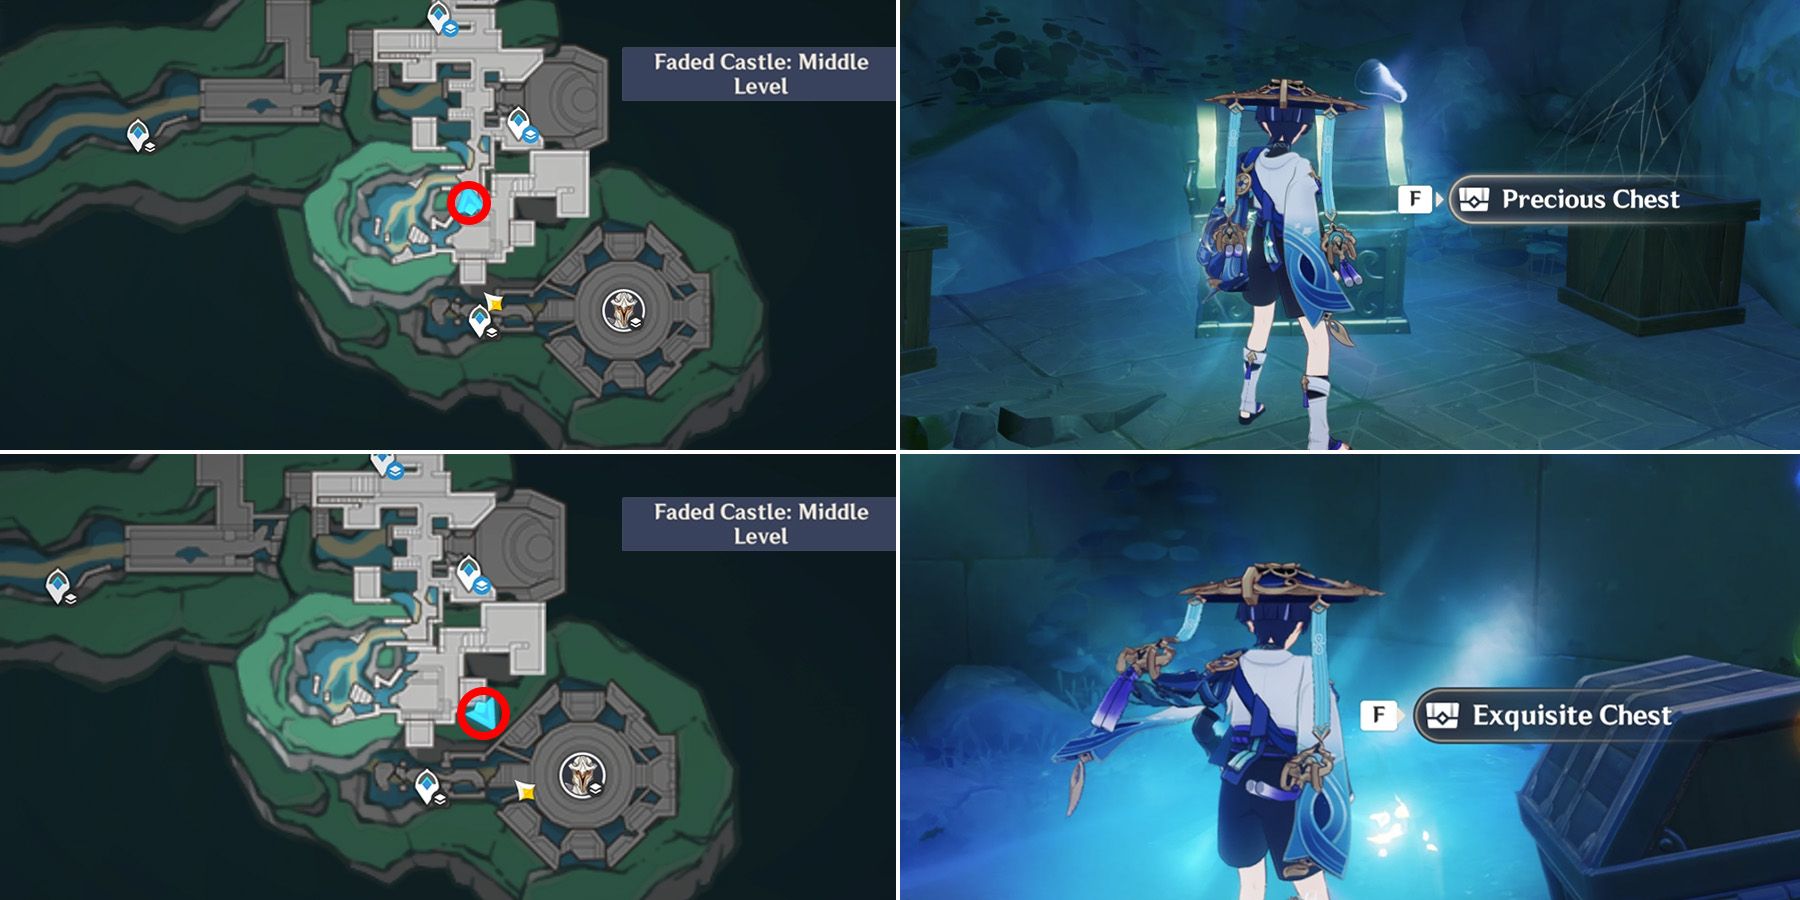 faded castle chest location 10-11 in genshin impact